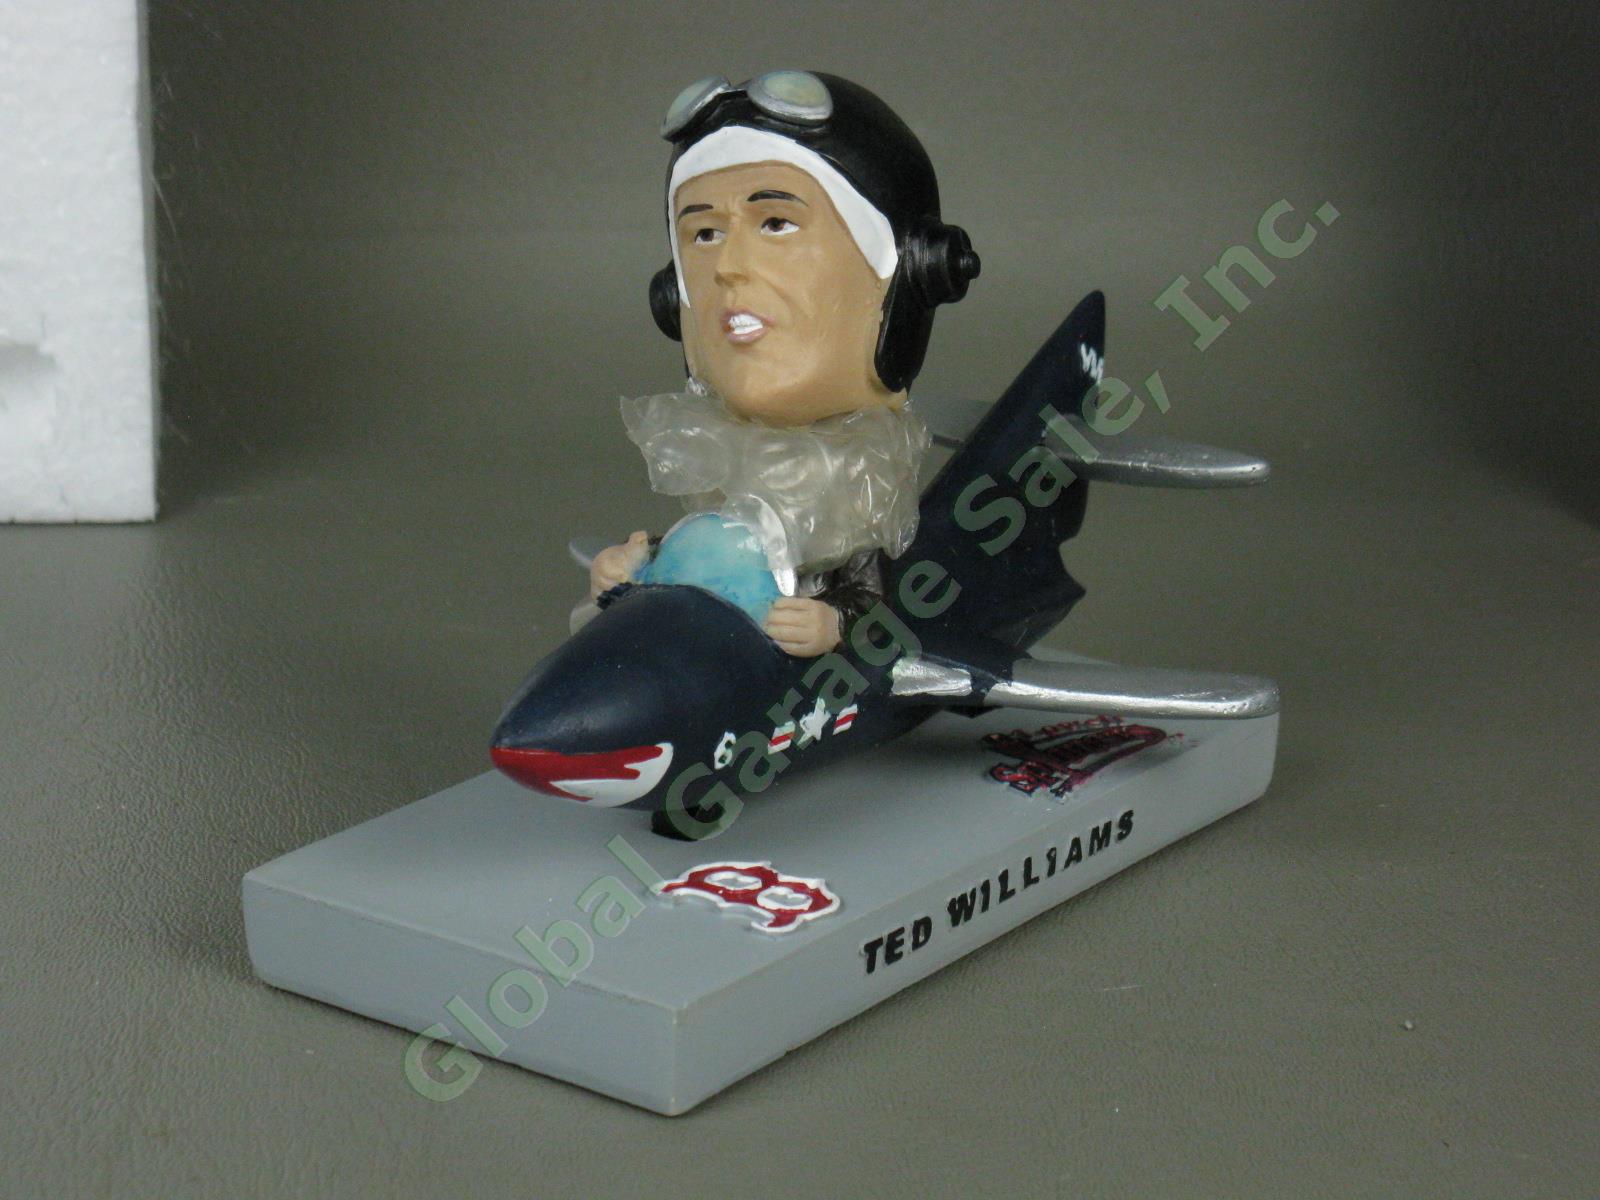 Rare NIB Ted Williams Lowell Spinners Red Sox WWII Jet Pilot Bobblehead 7/1/2008 2